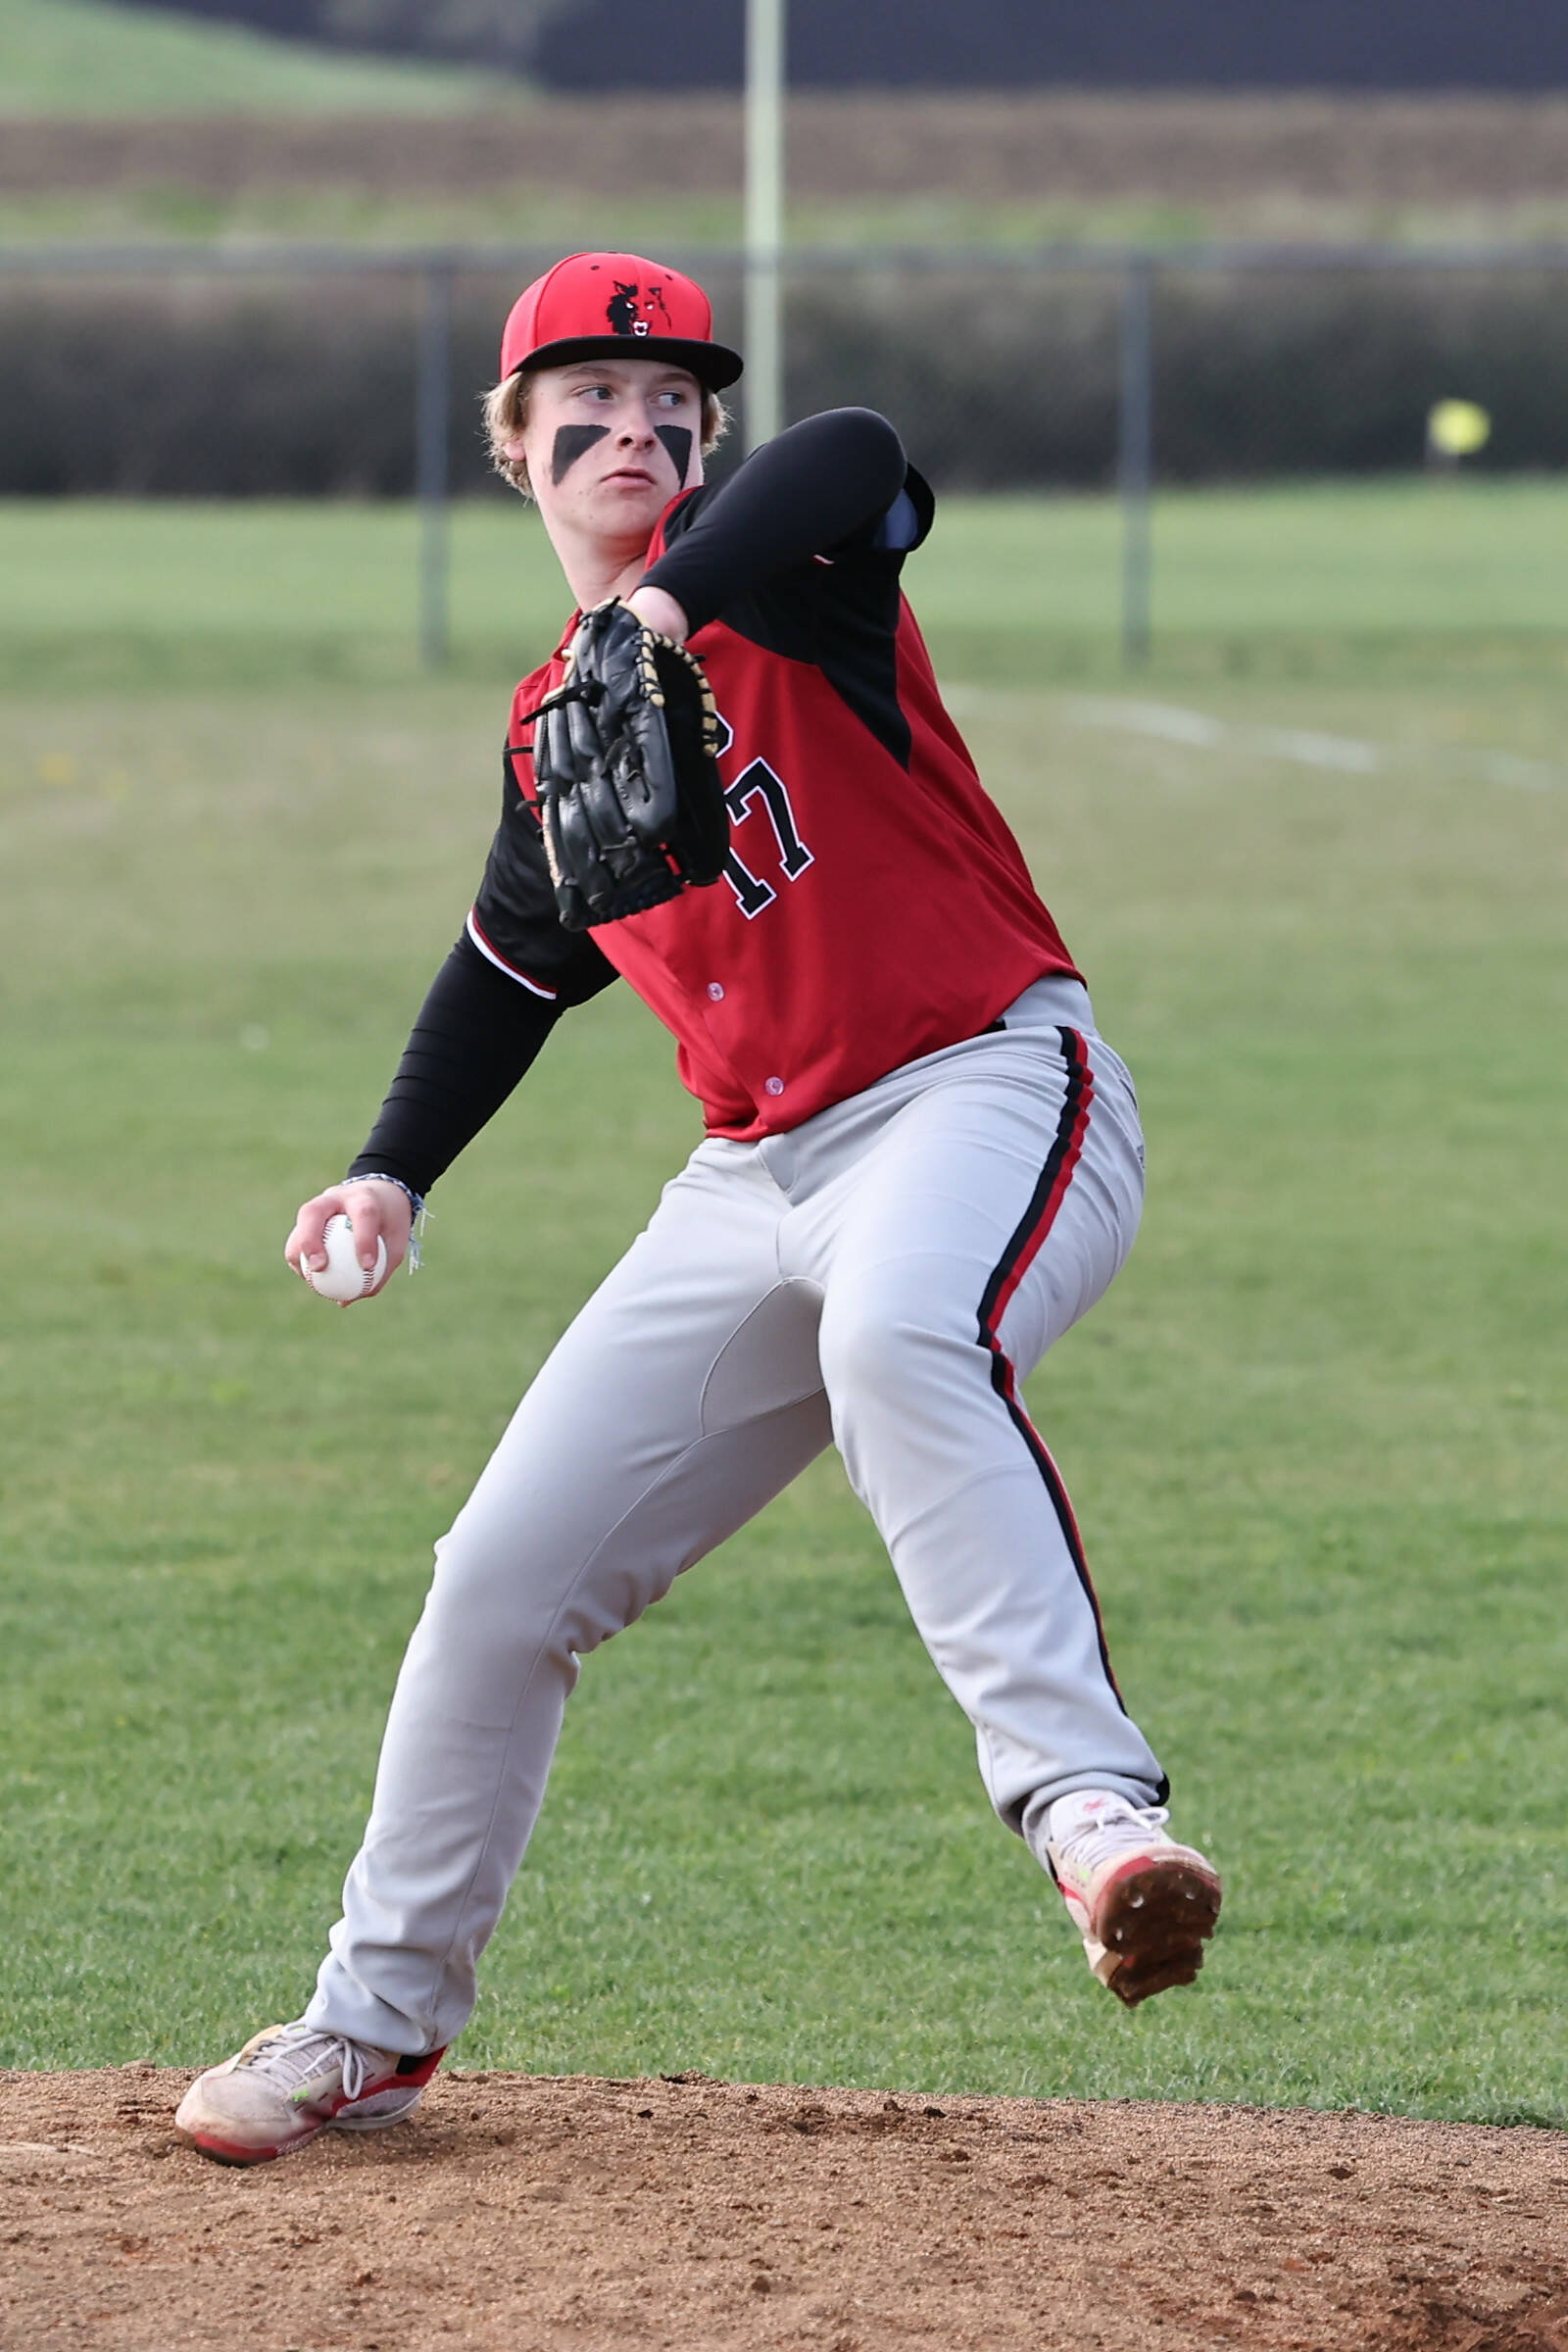 Coupeville freshman Camden Glover pitches in a baseball game against visiting Darrington High School April 11. The Wolves won 10-0. (Photo by John Fisken)